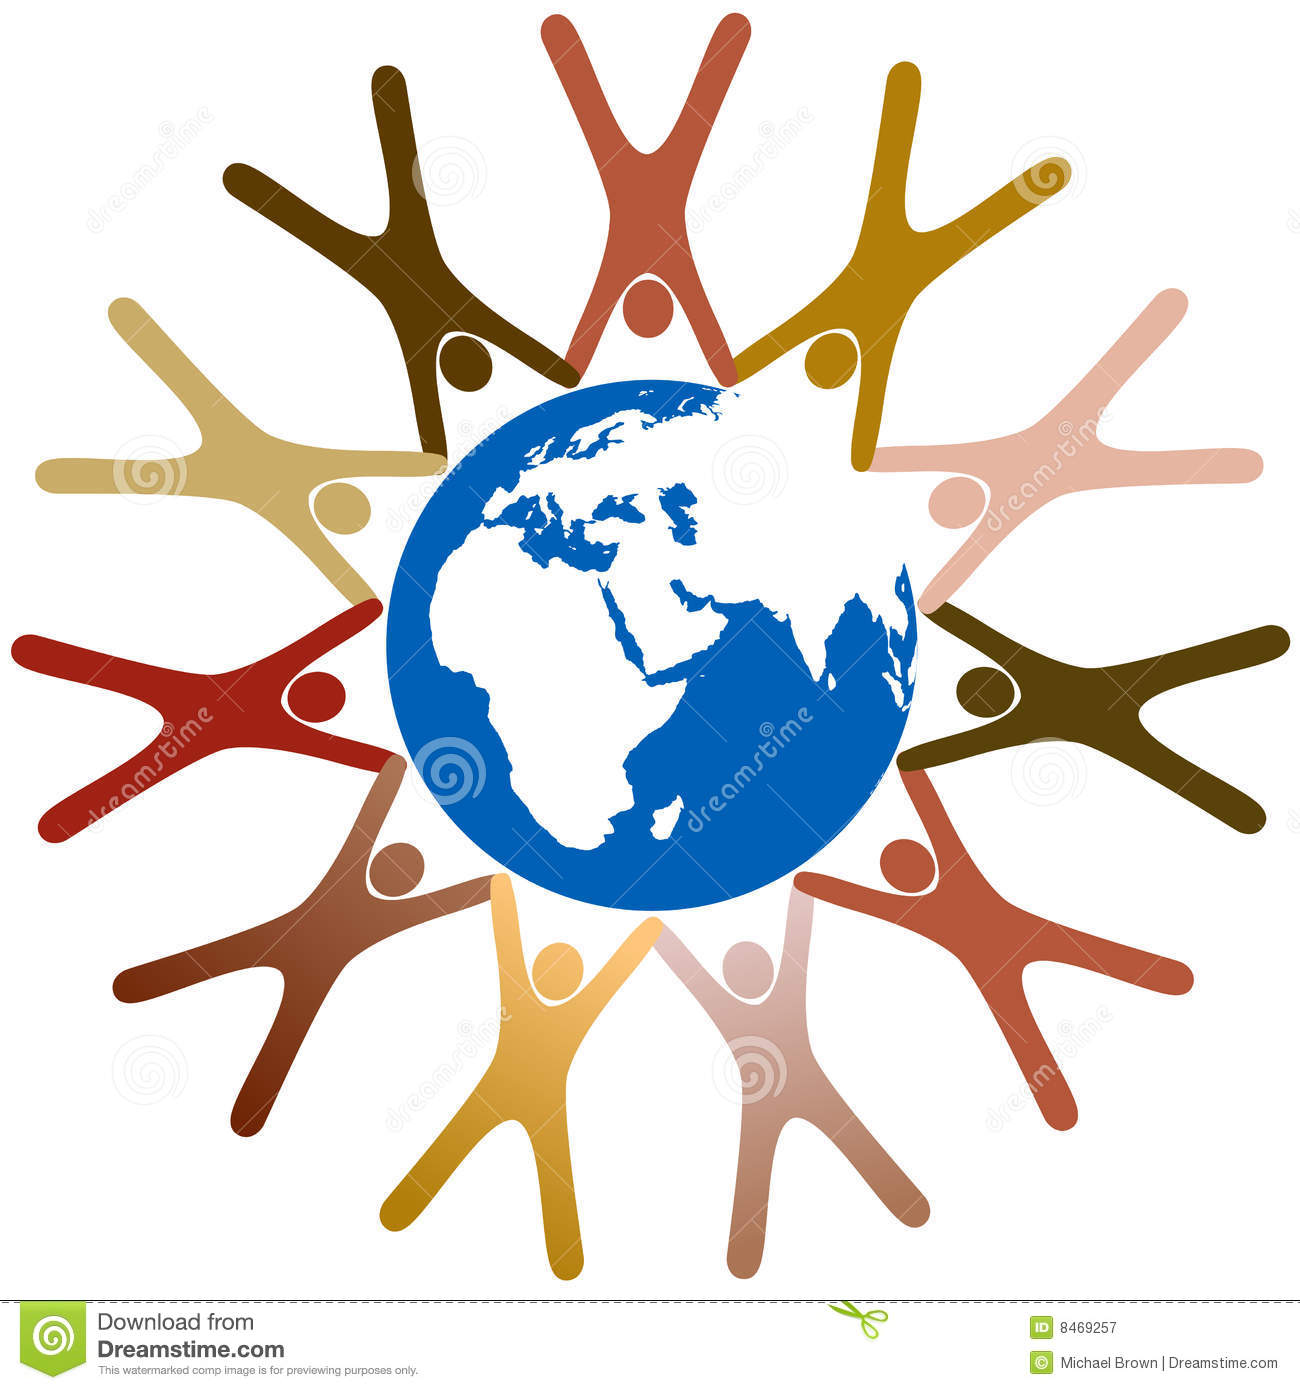 More Similar Stock Images Of   Diverse Symbol People Hold Hands Around